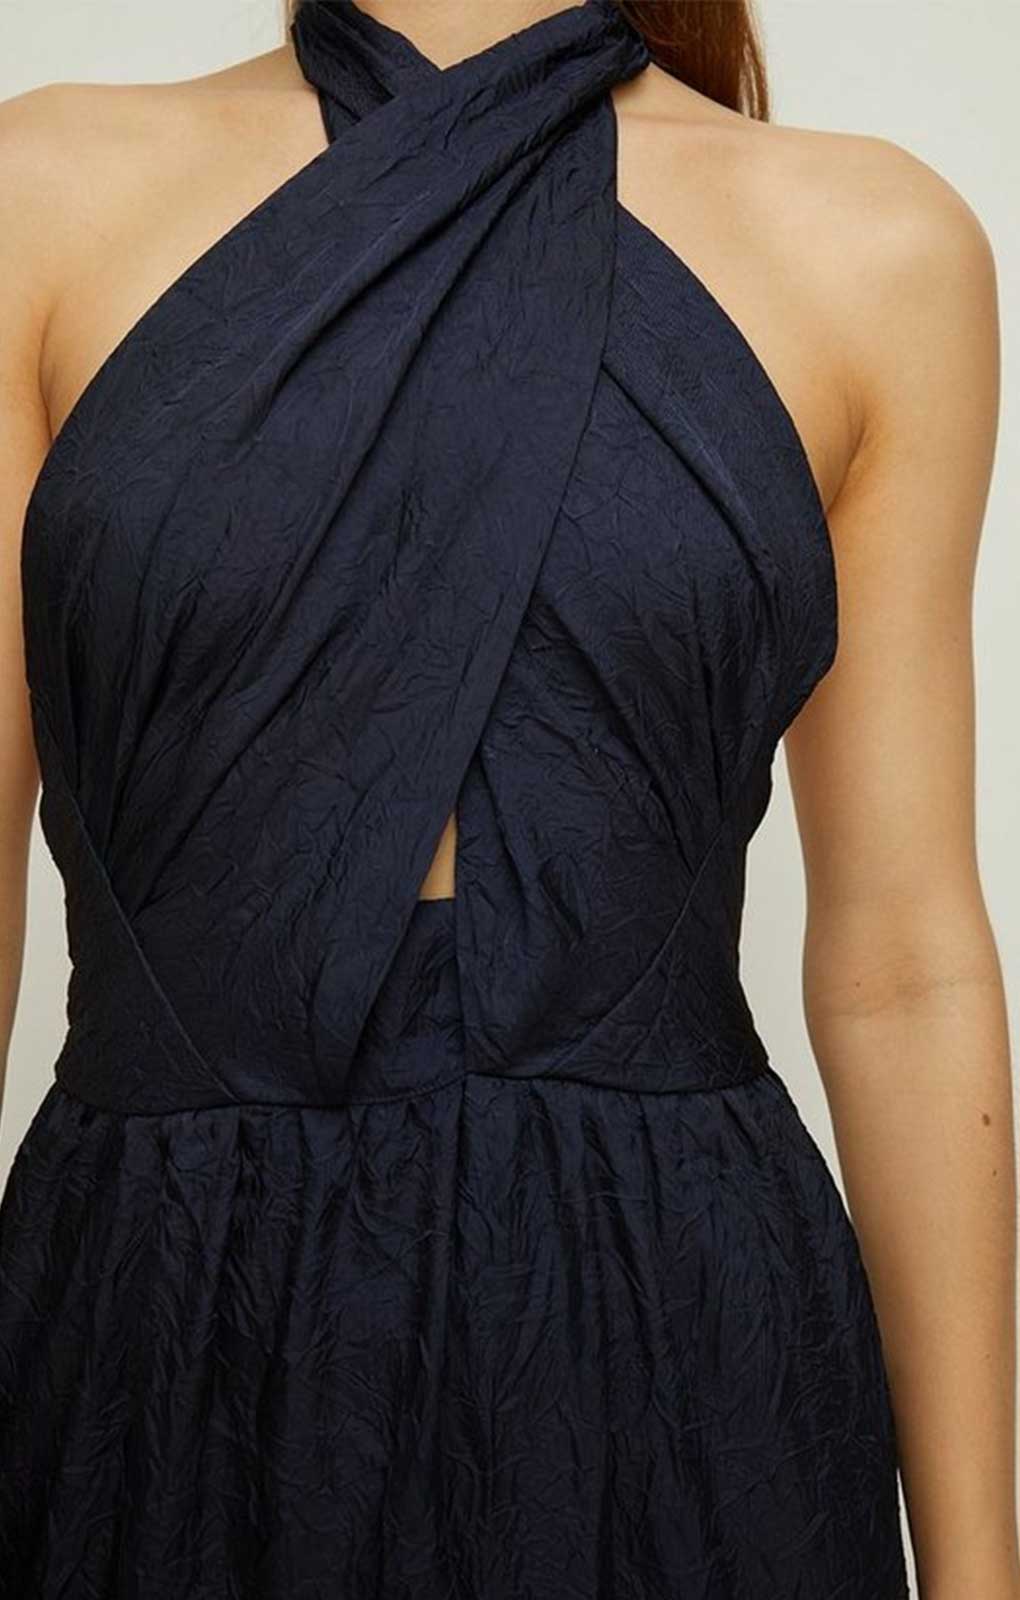 Oasis Navy Cross Neck Halter Tiered Maxi Dress product image